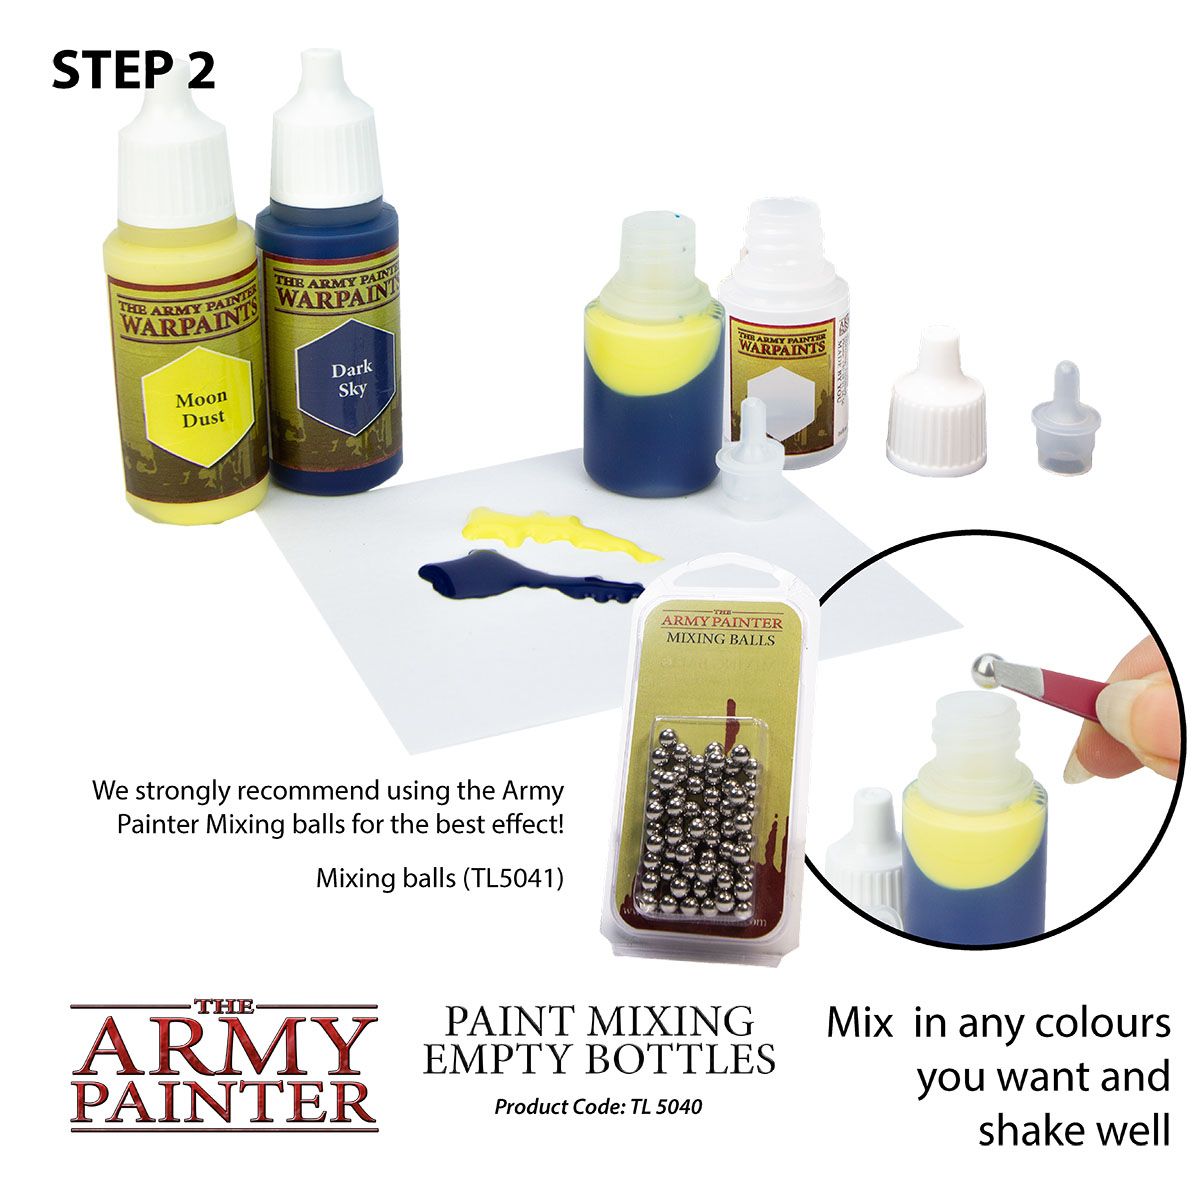 Empty Paint Mixing Bottles (The Army Painter)